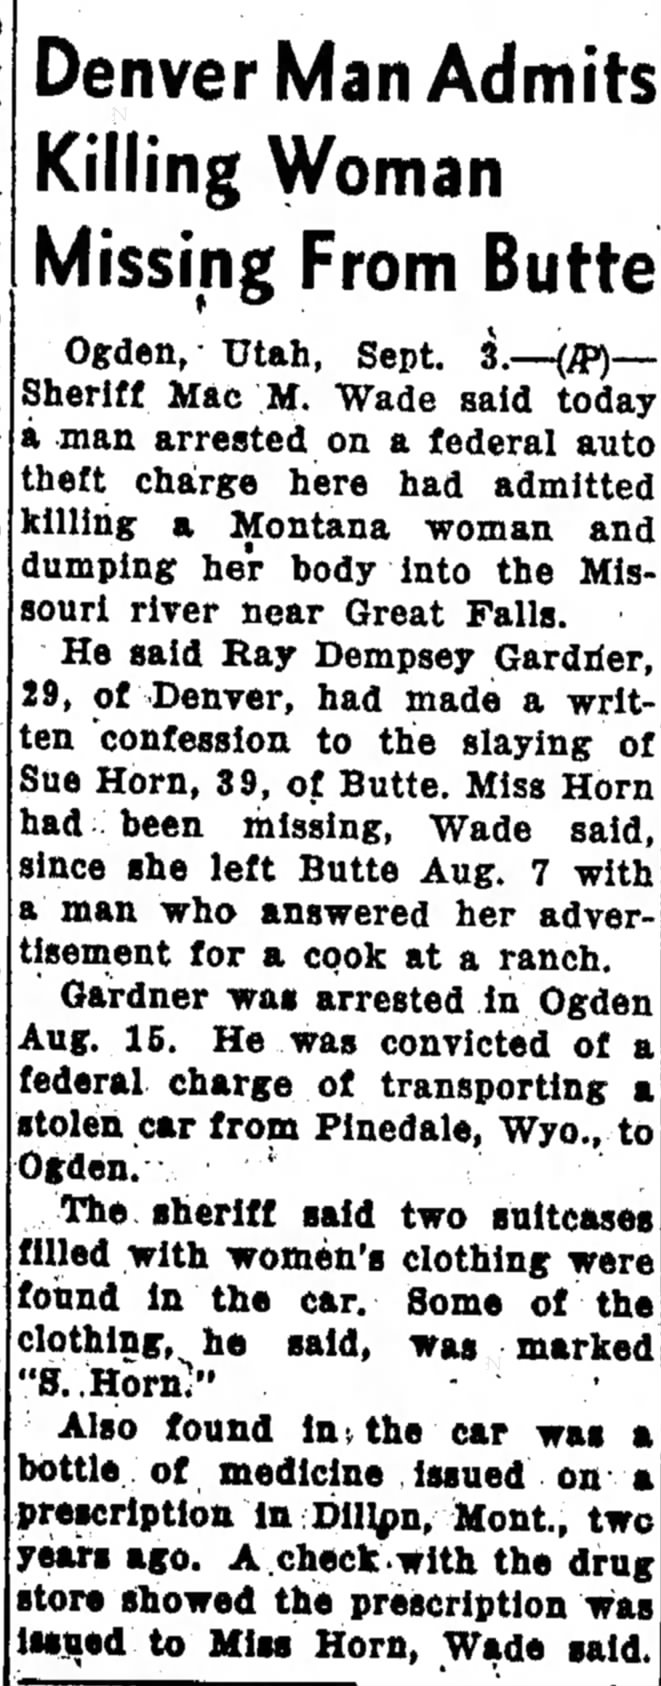 The Independent Record, Helena Montana, Saturday, Sept. 3, 1949